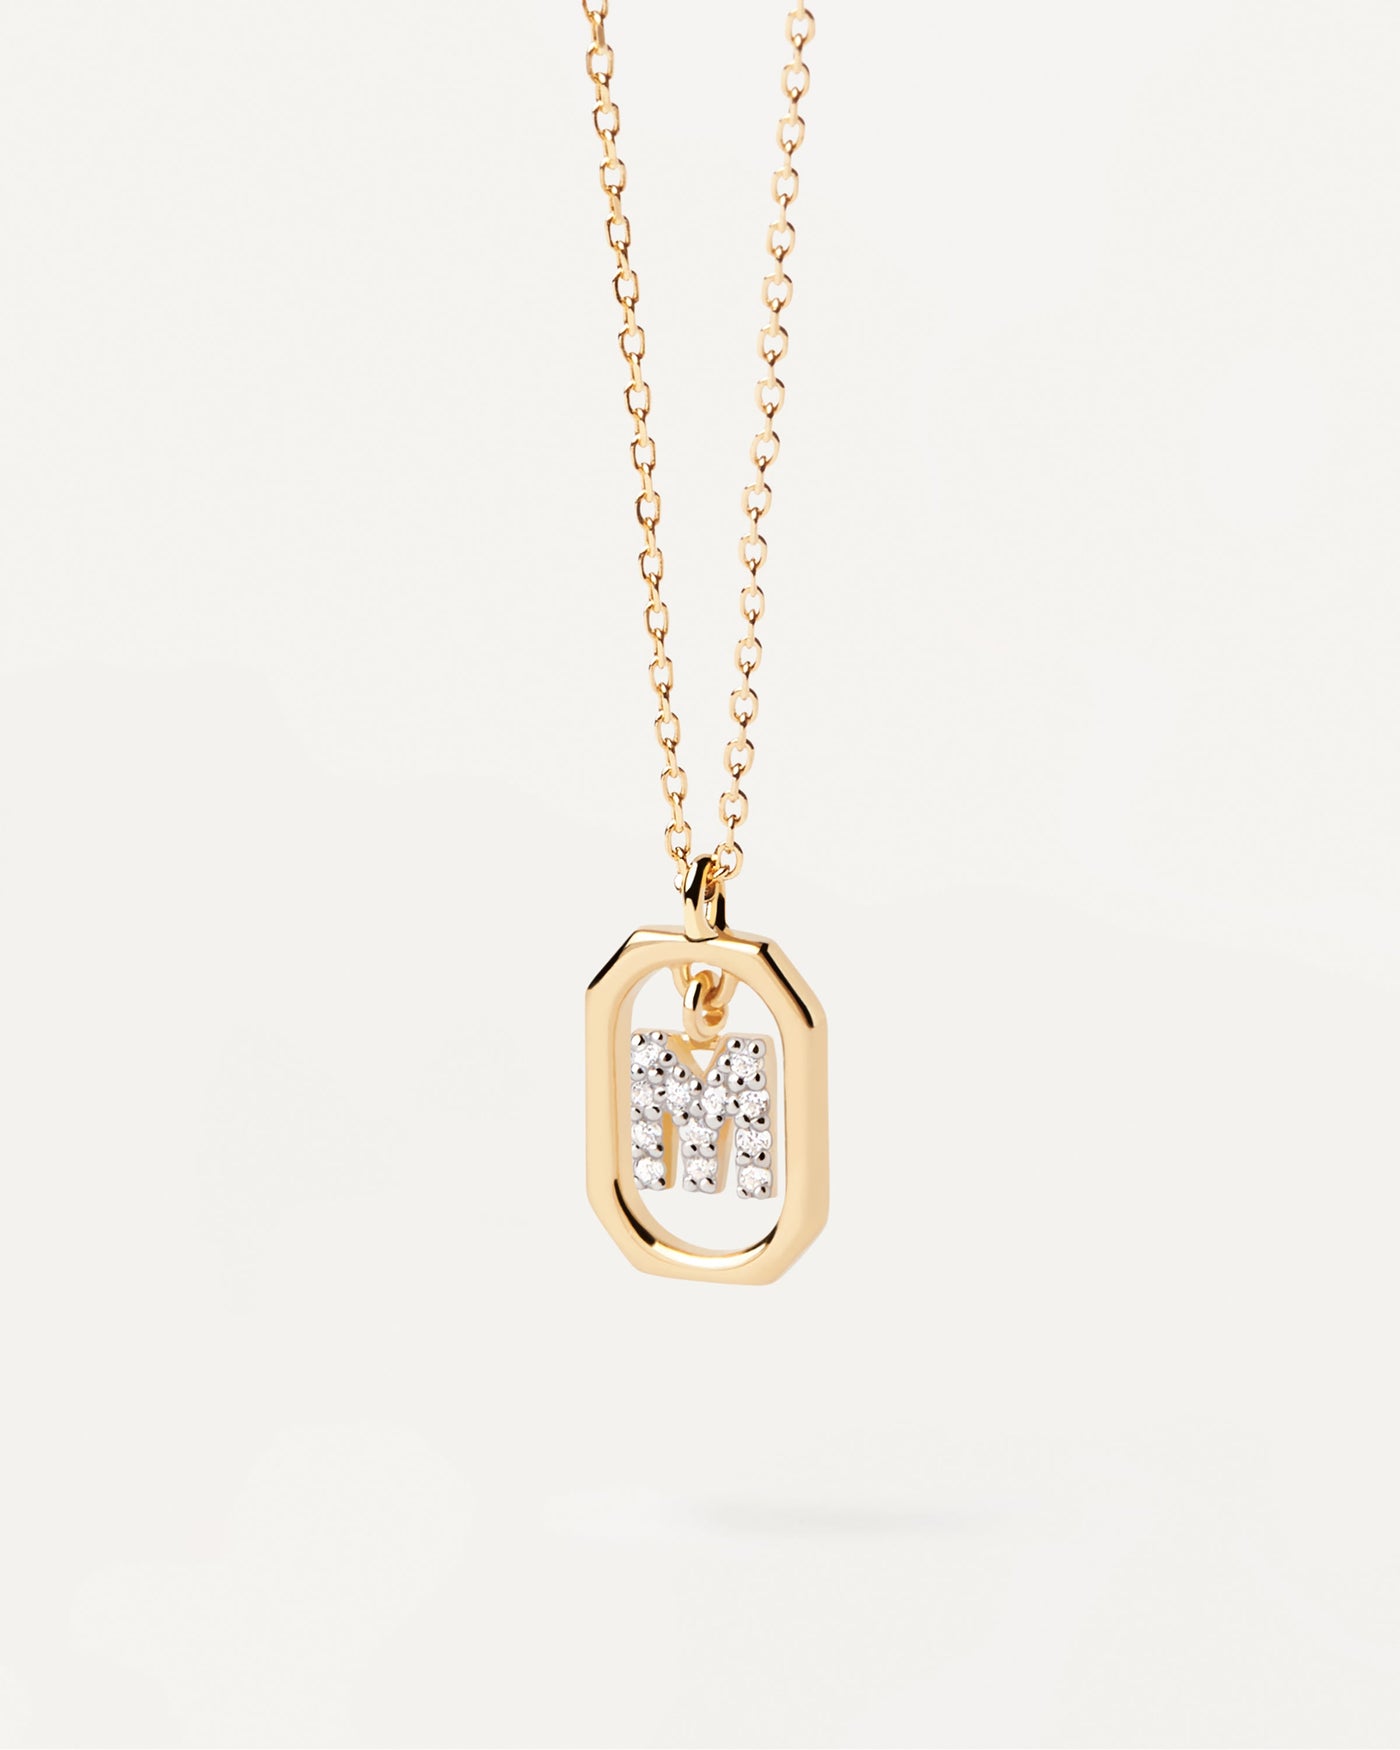 2023 Selection | Mini Letter M Necklace. Small initial M necklace in zirconia inside gold-plated silver octagonal pendant. Get the latest arrival from PDPAOLA. Place your order safely and get this Best Seller. Free Shipping.